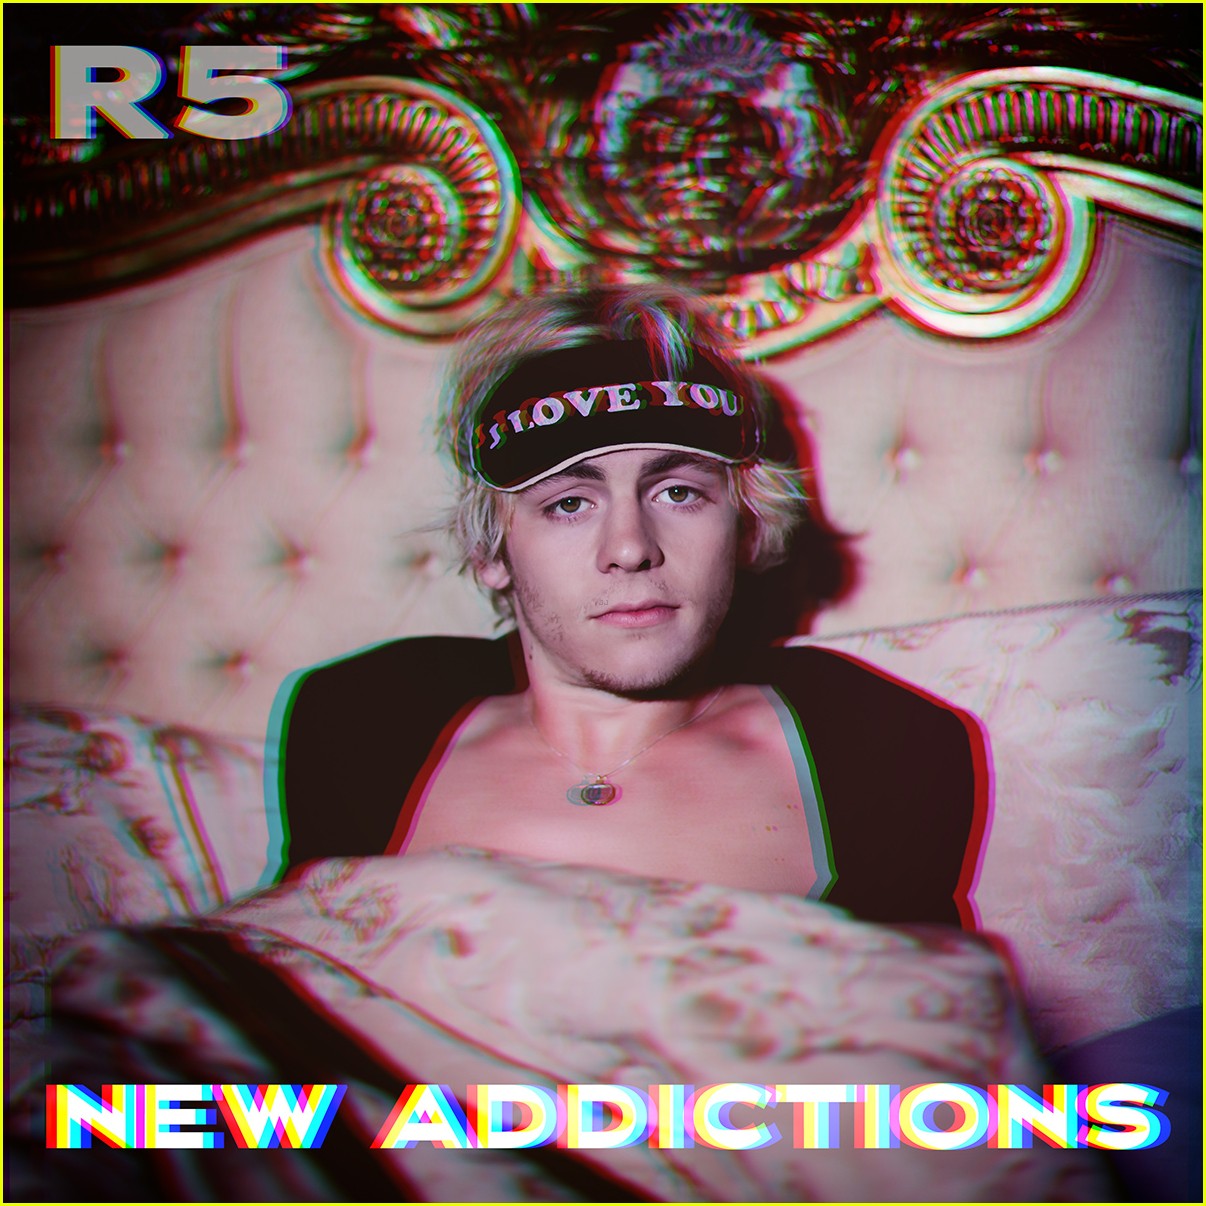 r5 new addictions covers 04